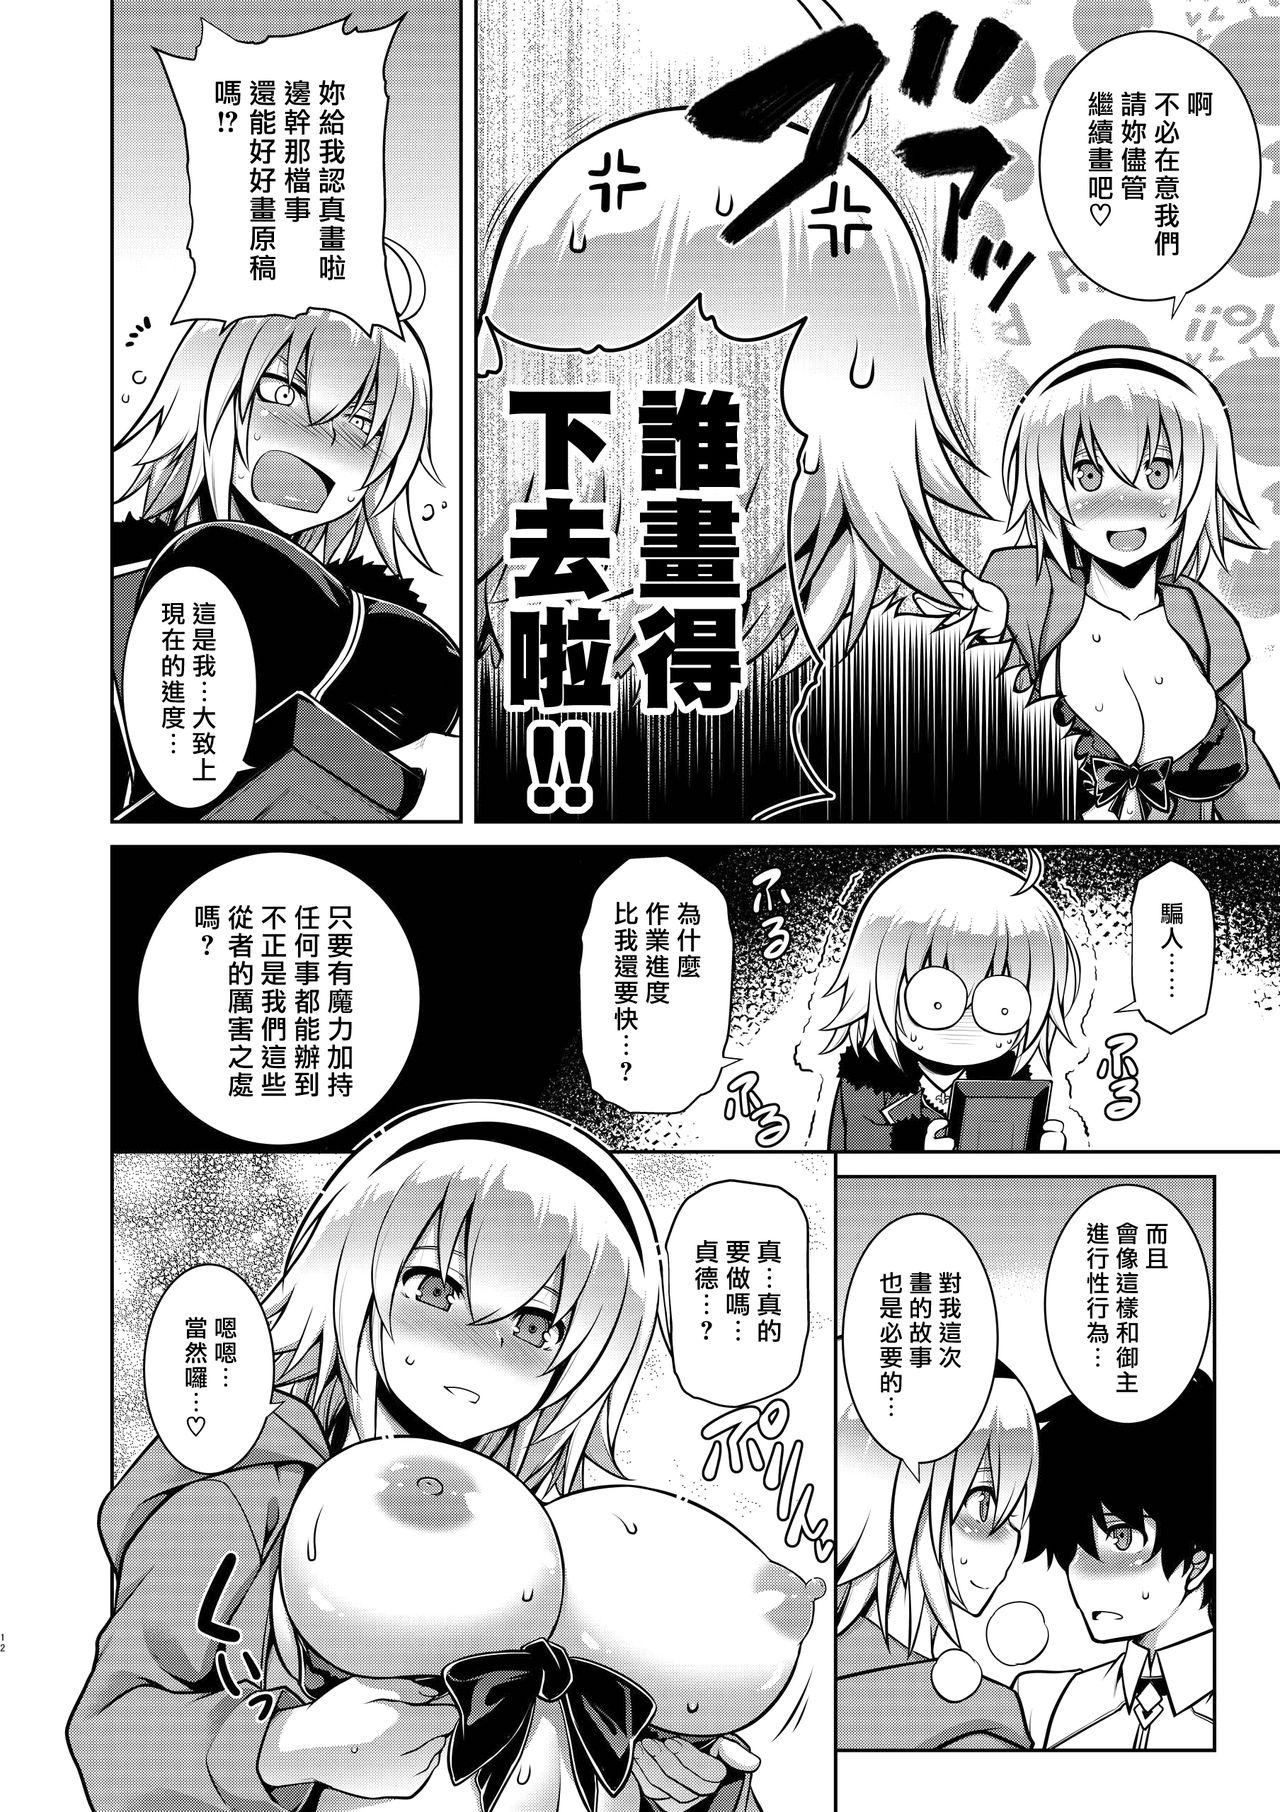 Female Itezora no Summer Lady - Fate grand order Penis Sucking - Page 11